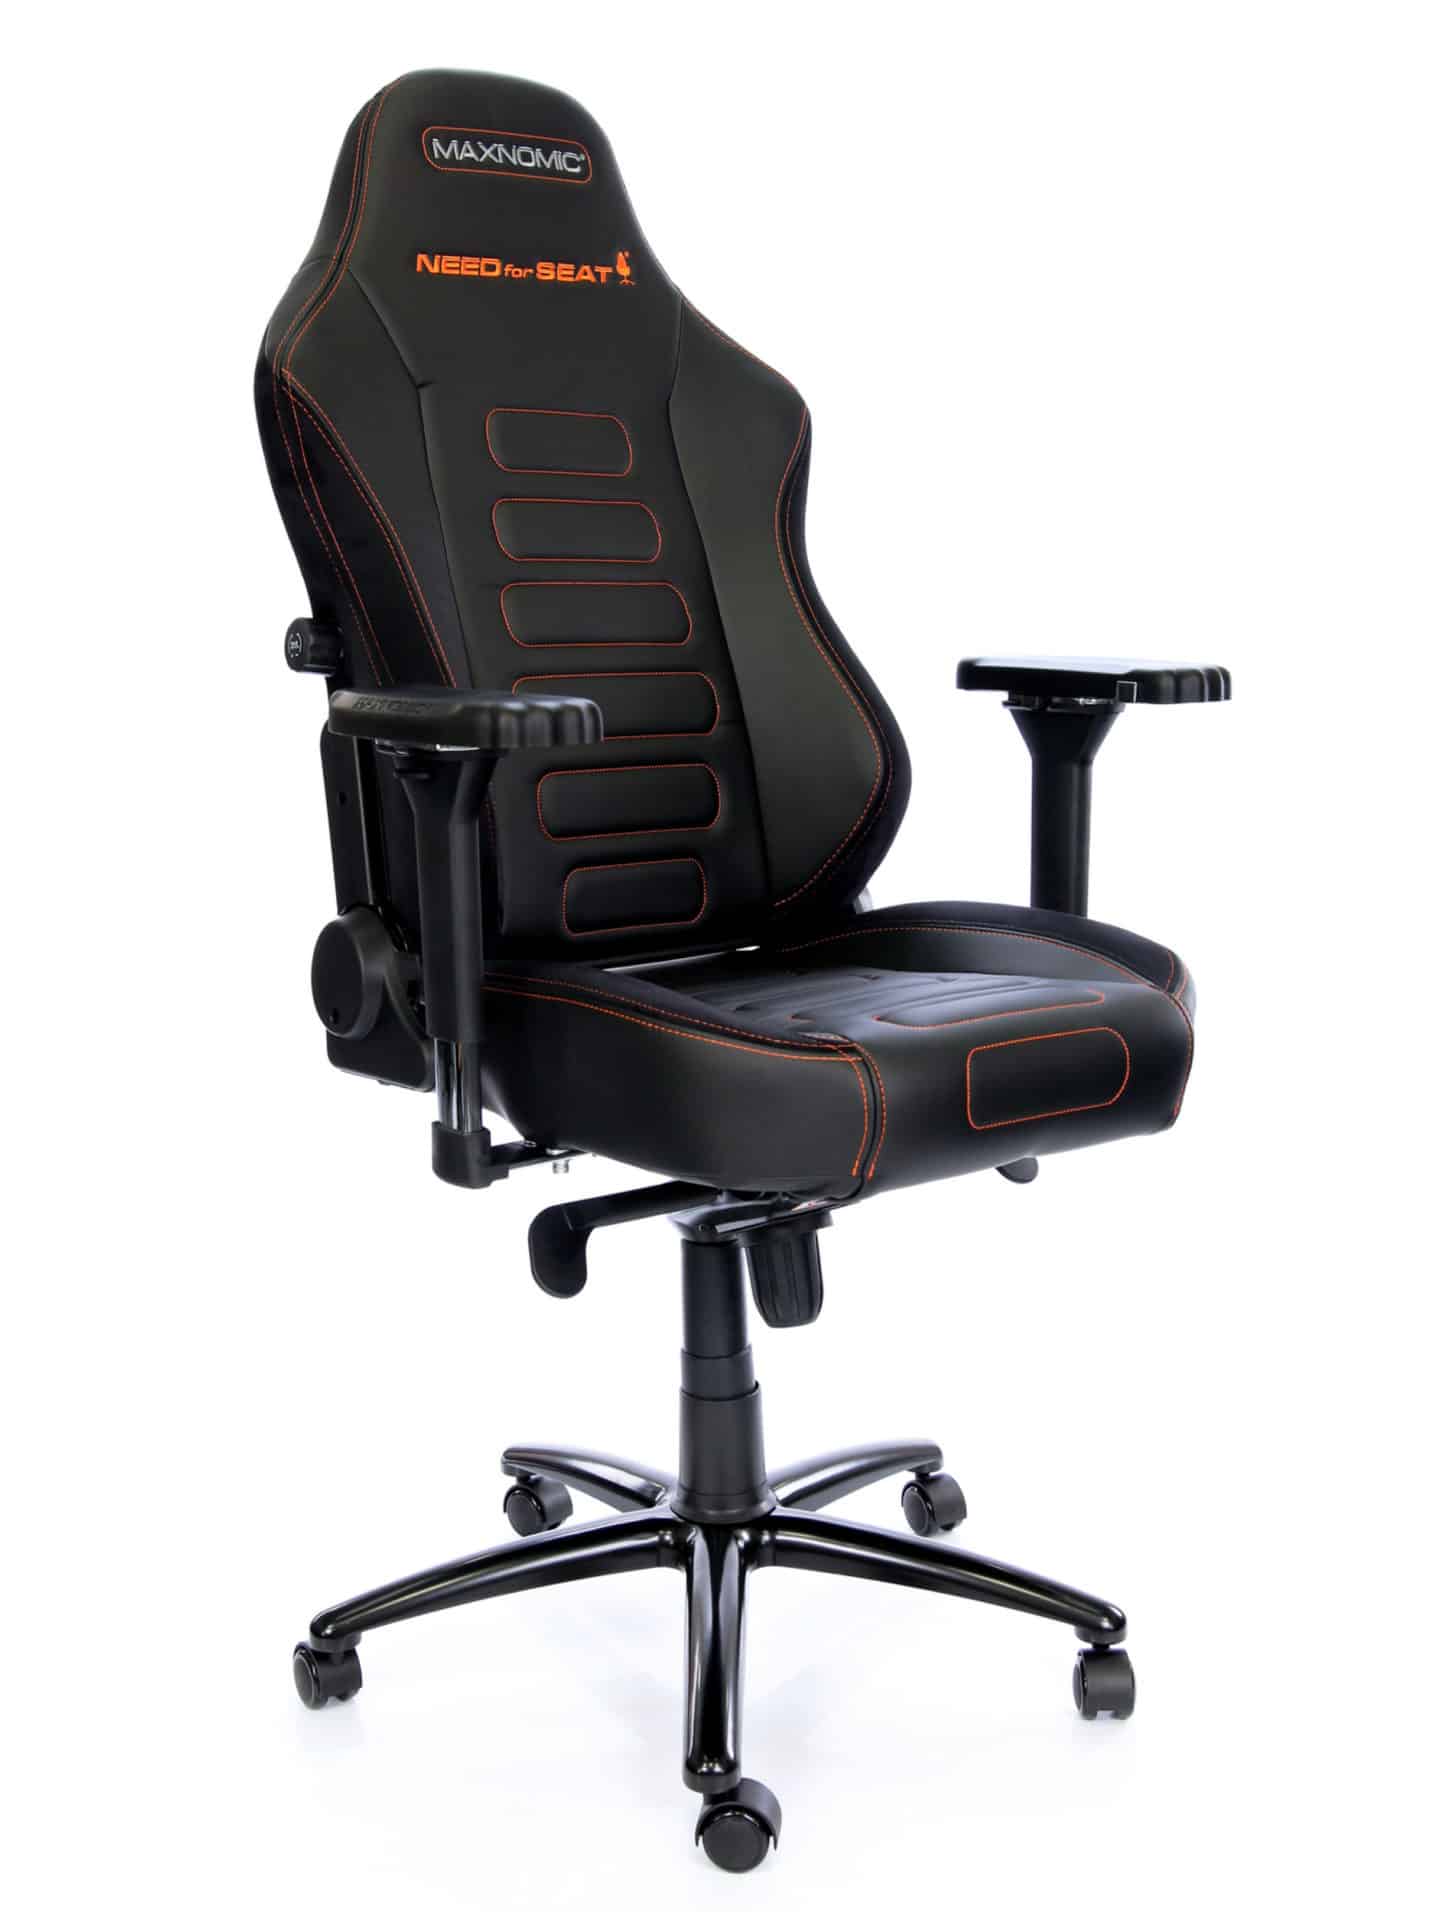 Office chair model Maxnomic® NEEDforSEAT® OFC - A black gaming chair with orange stitching, the design-protected 4D armrests and the orange NEEDforSEAT® logo embroidered into the backrest.